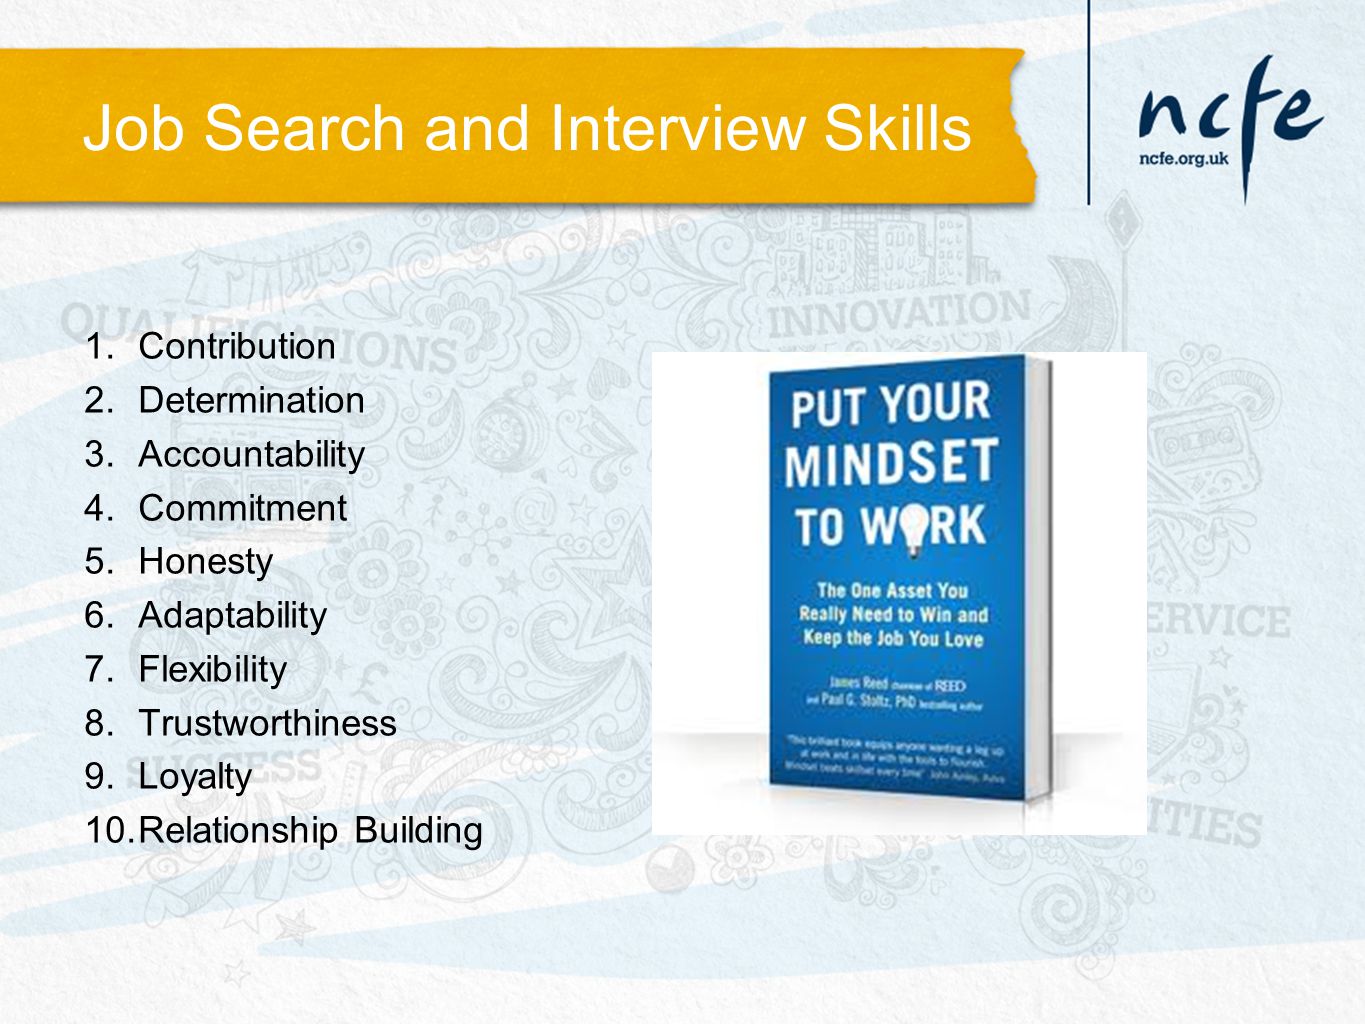 Job Search and Interview Skills 1.Contribution 2.Determination 3.Accountability 4.Commitment 5.Honesty 6.Adaptability 7.Flexibility 8.Trustworthiness 9.Loyalty 10.Relationship Building